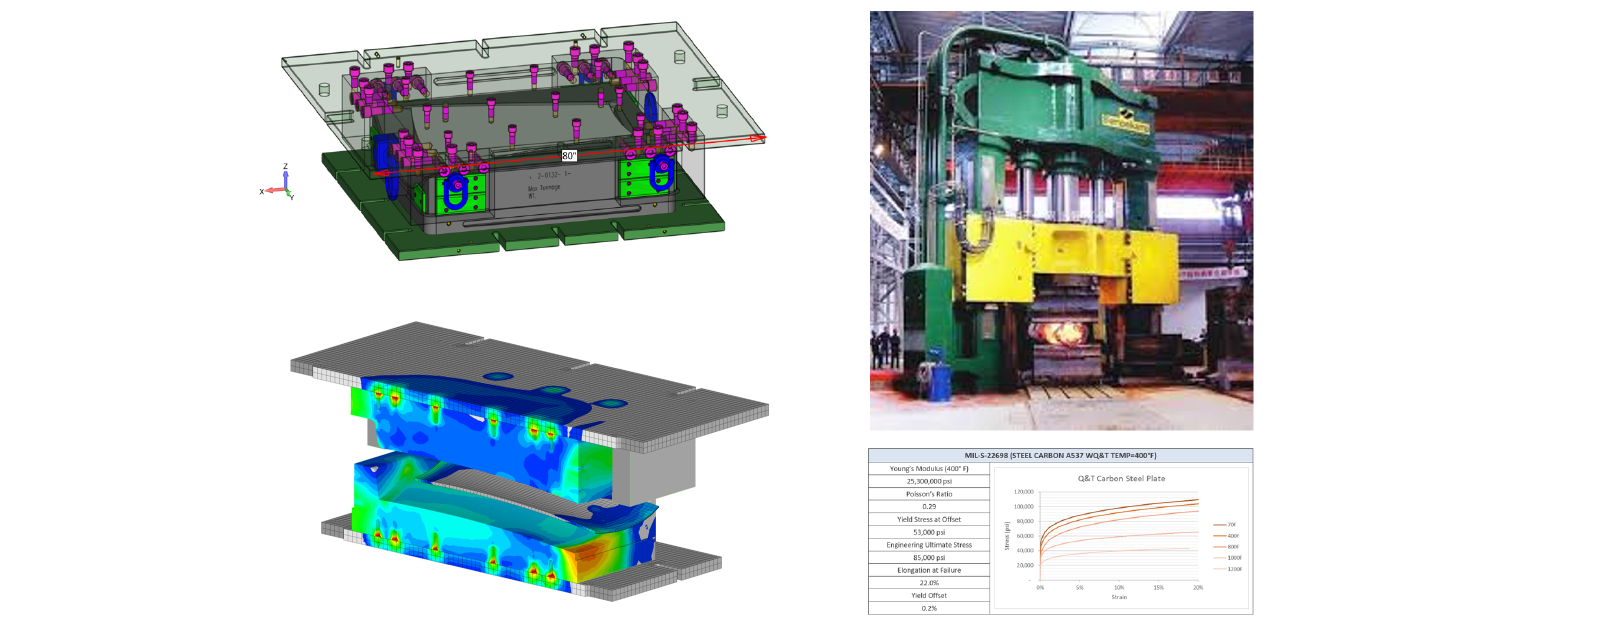 Low-Cycle Fatigue Analysis of Forging Die under 5,000 Ton Load - FEA Consulting Service